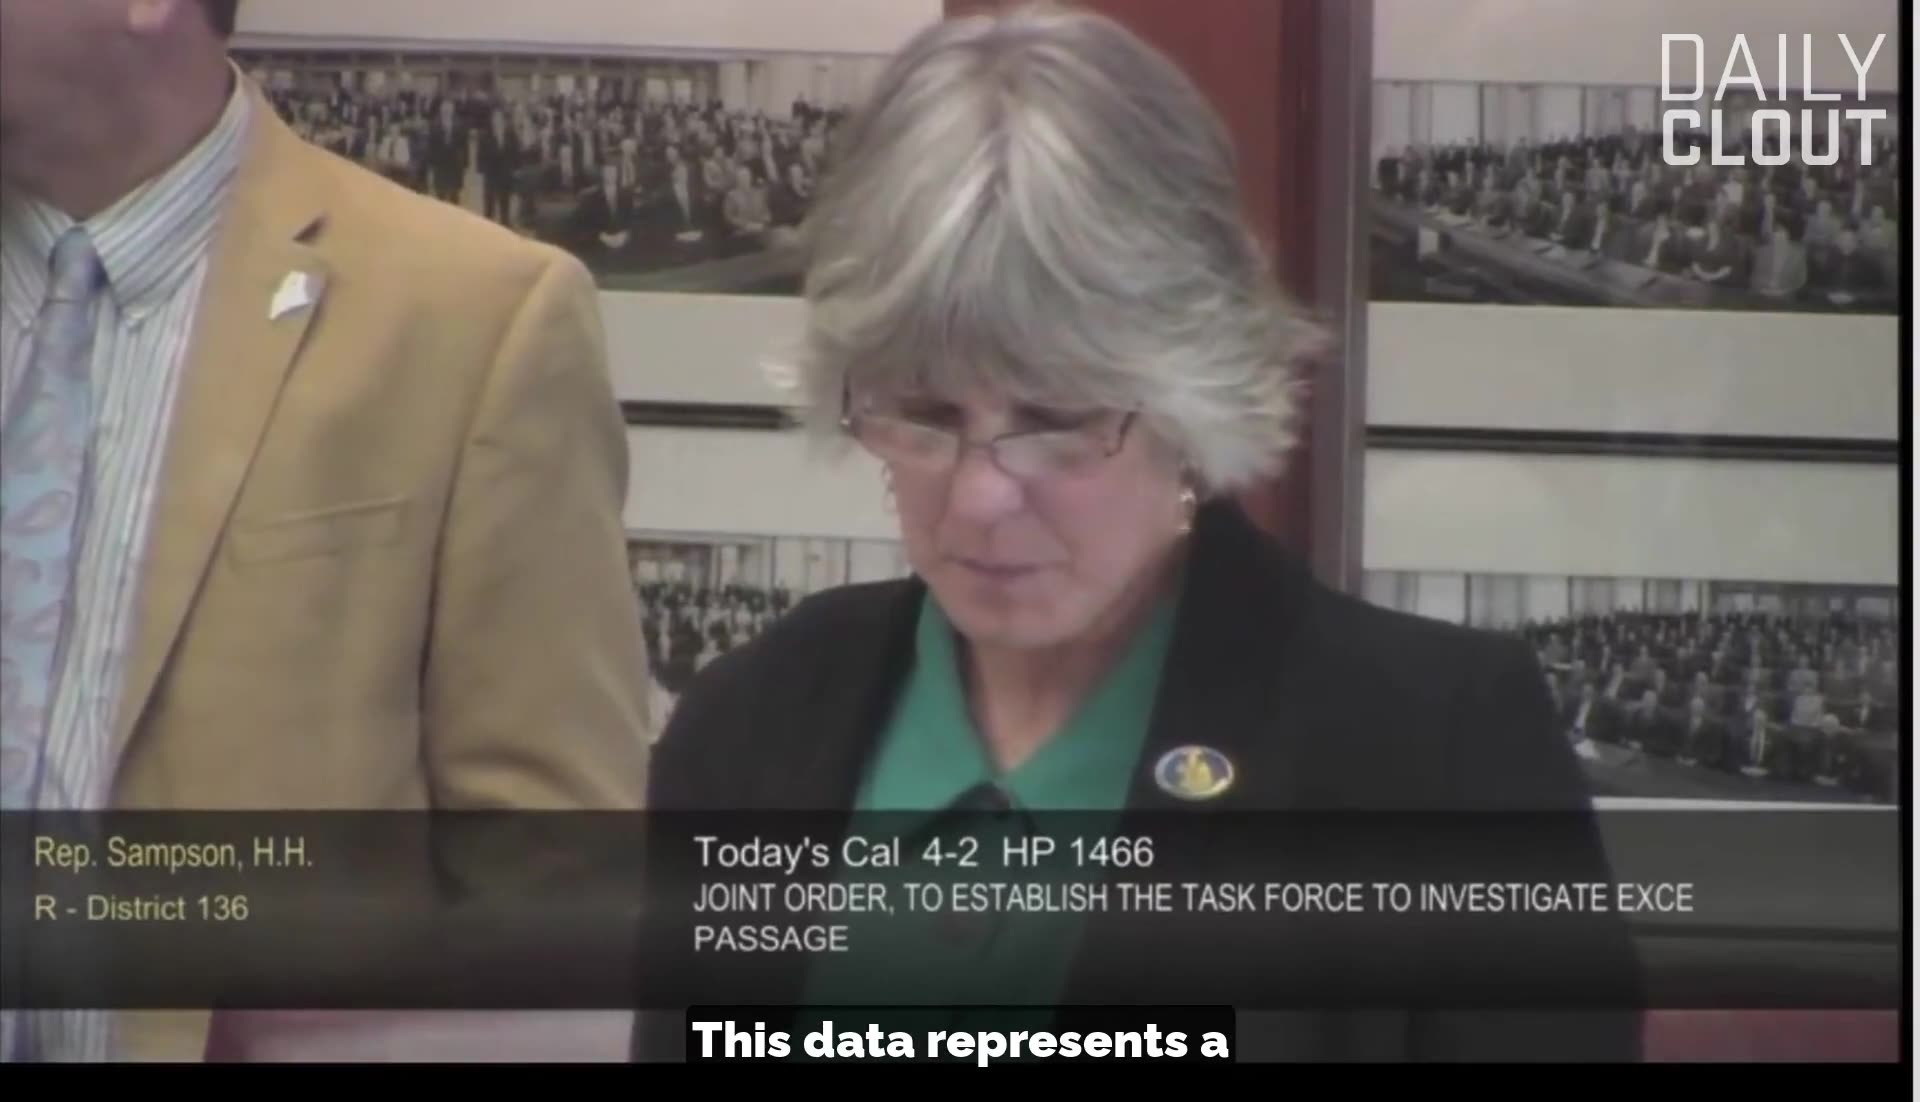 "Maine House DENIES Request to Investigate Excess Deaths in Working-Age Adults"